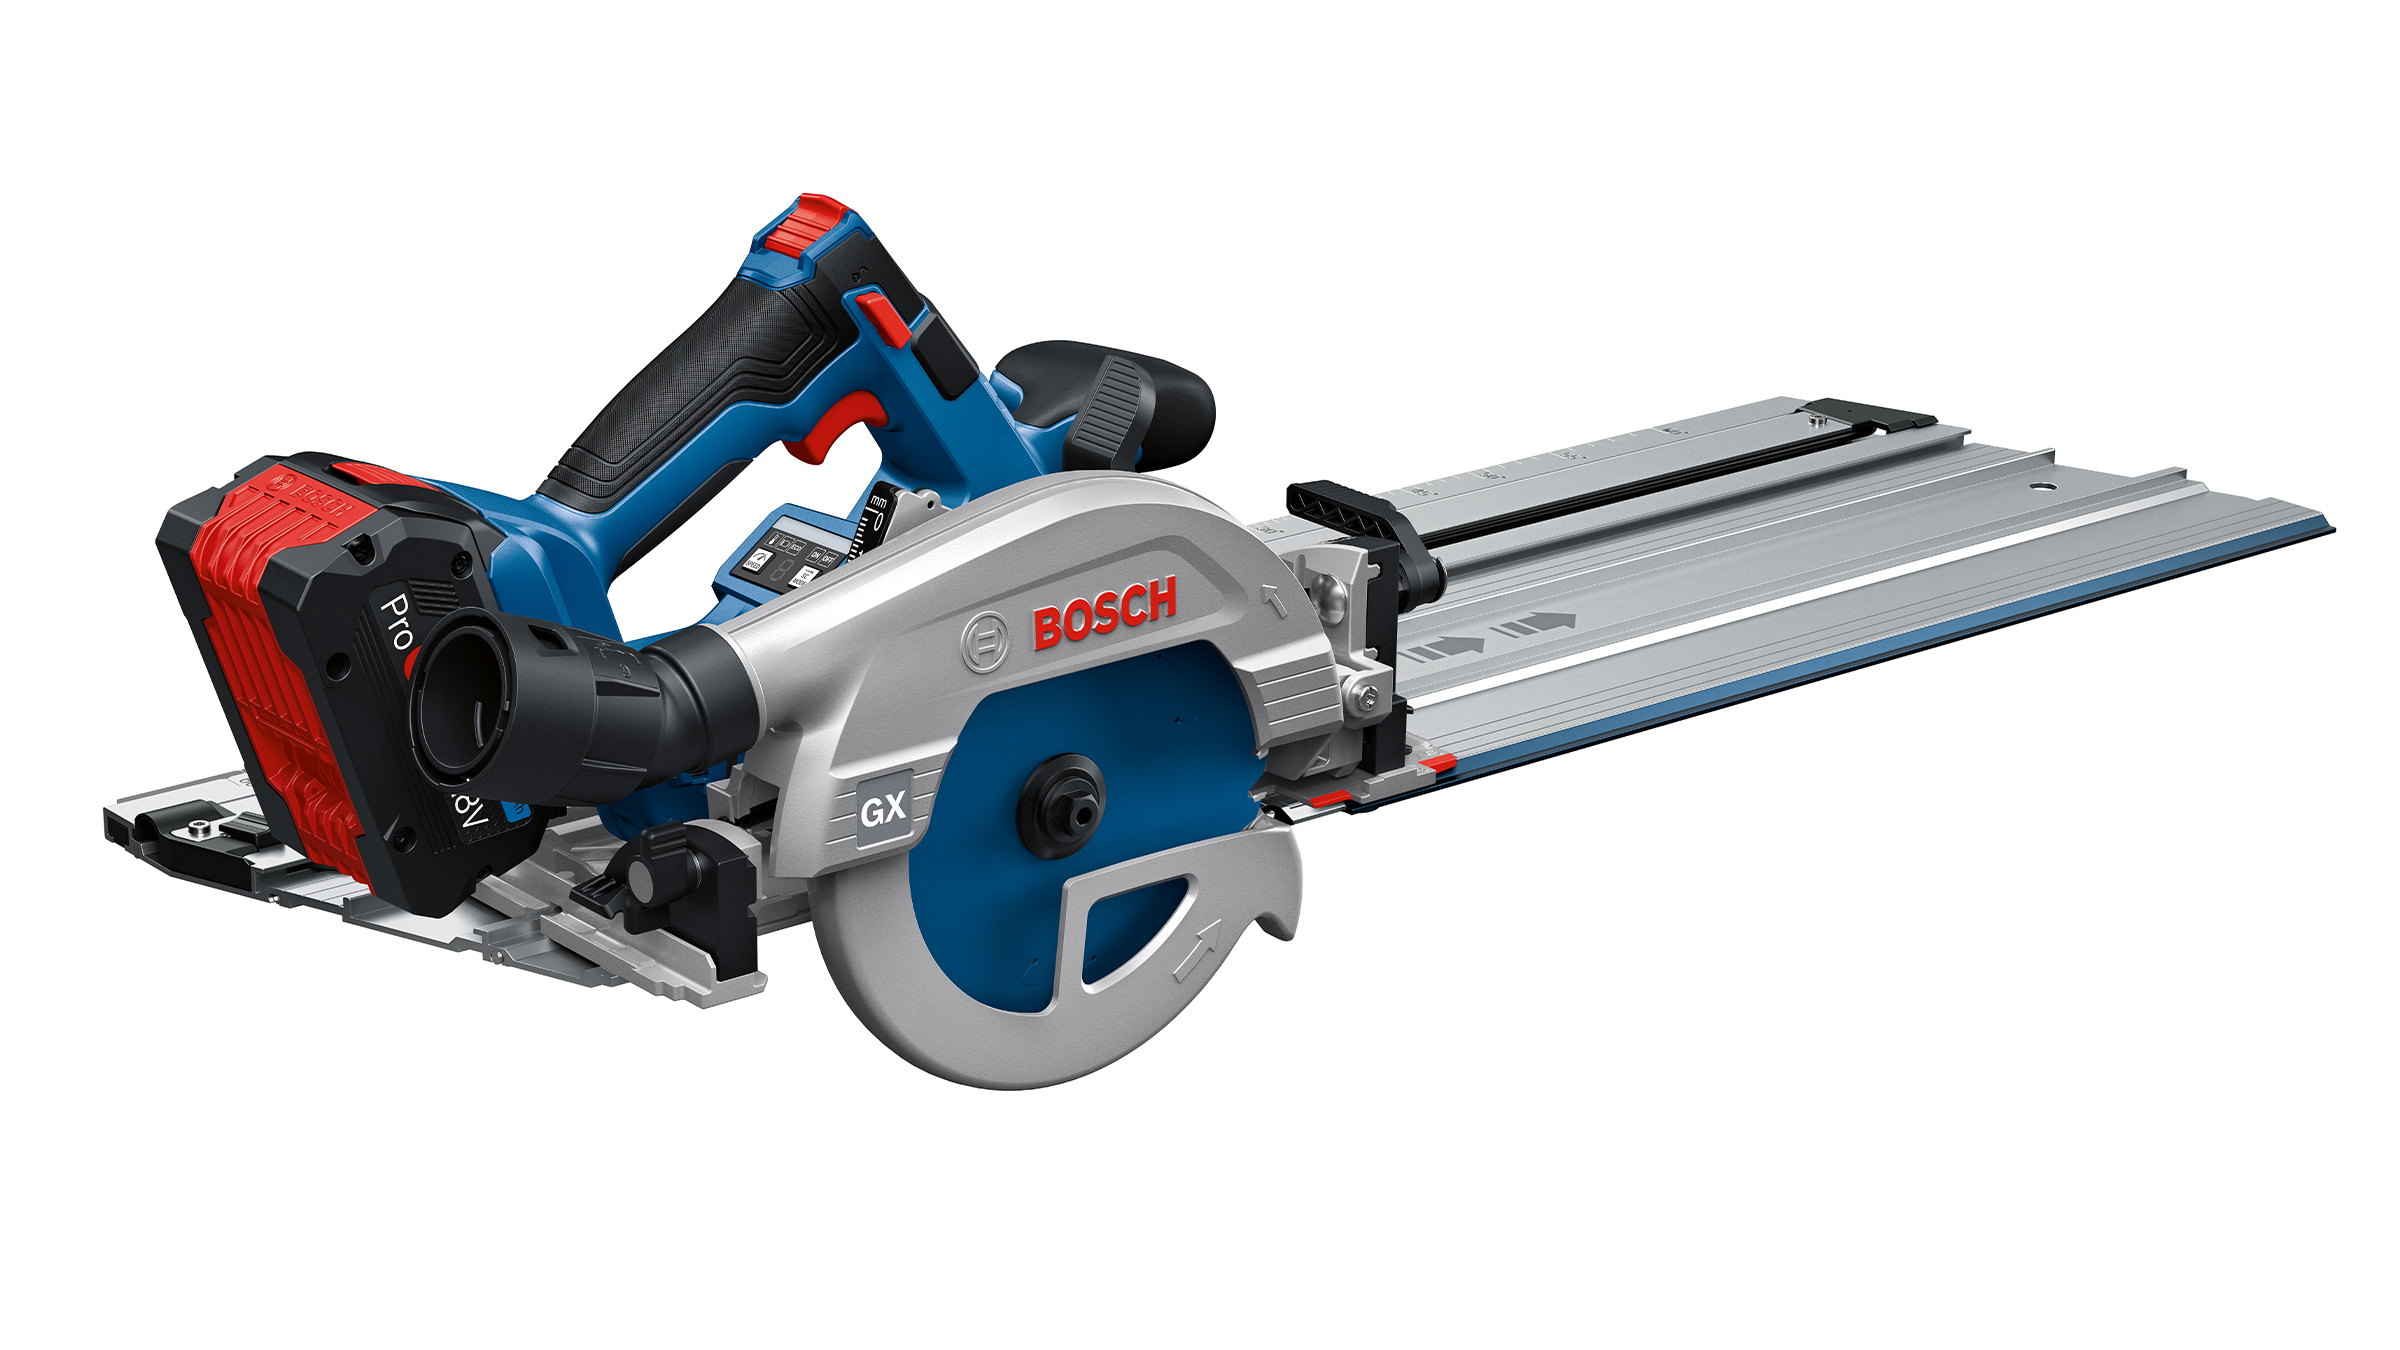 New in the Professional 18V System: First Bosch cross-cutting guiderail compatible circular saw